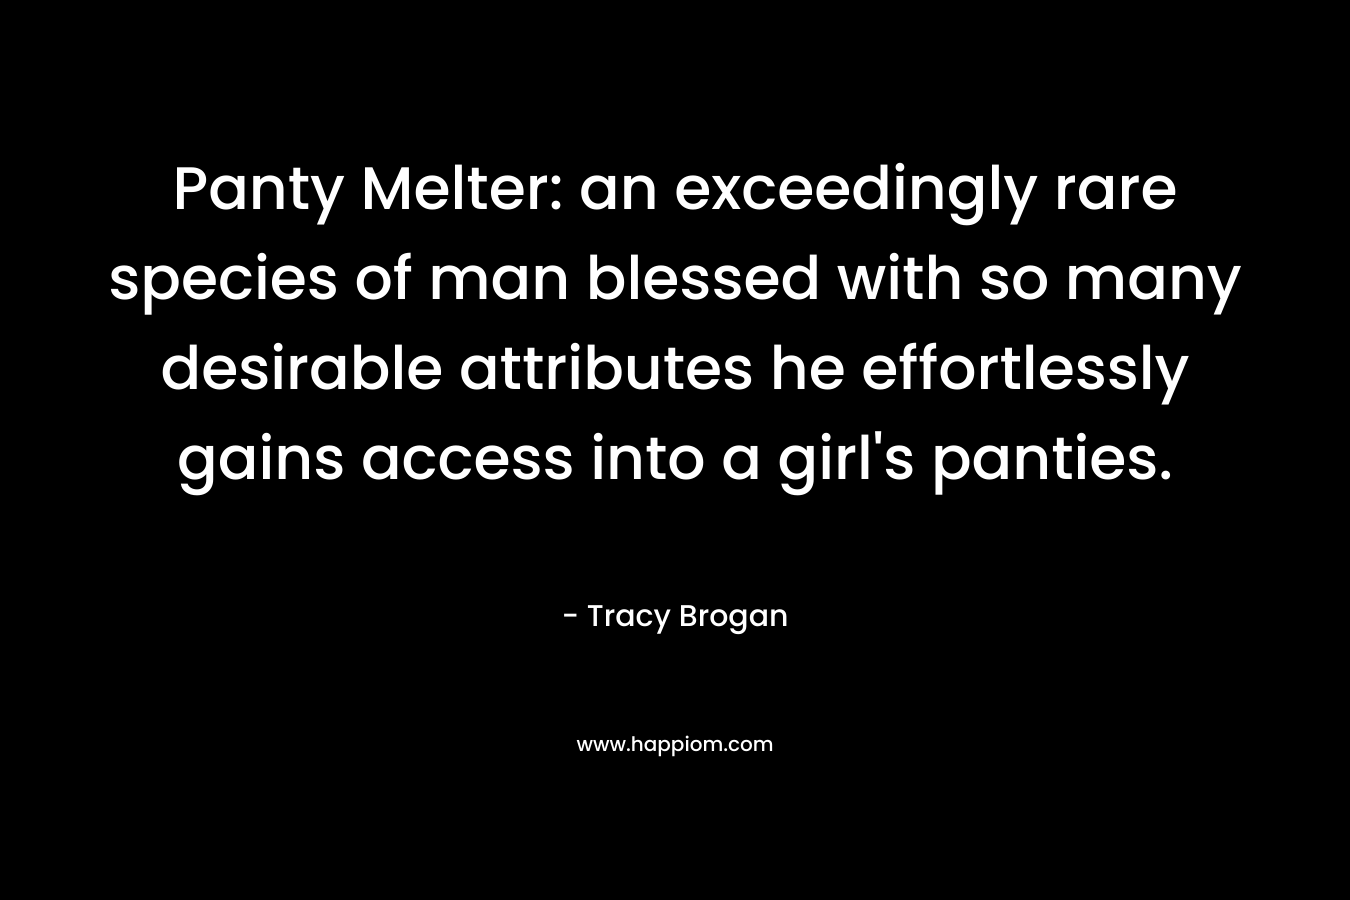 Panty Melter: an exceedingly rare species of man blessed with so many desirable attributes he effortlessly gains access into a girl's panties.